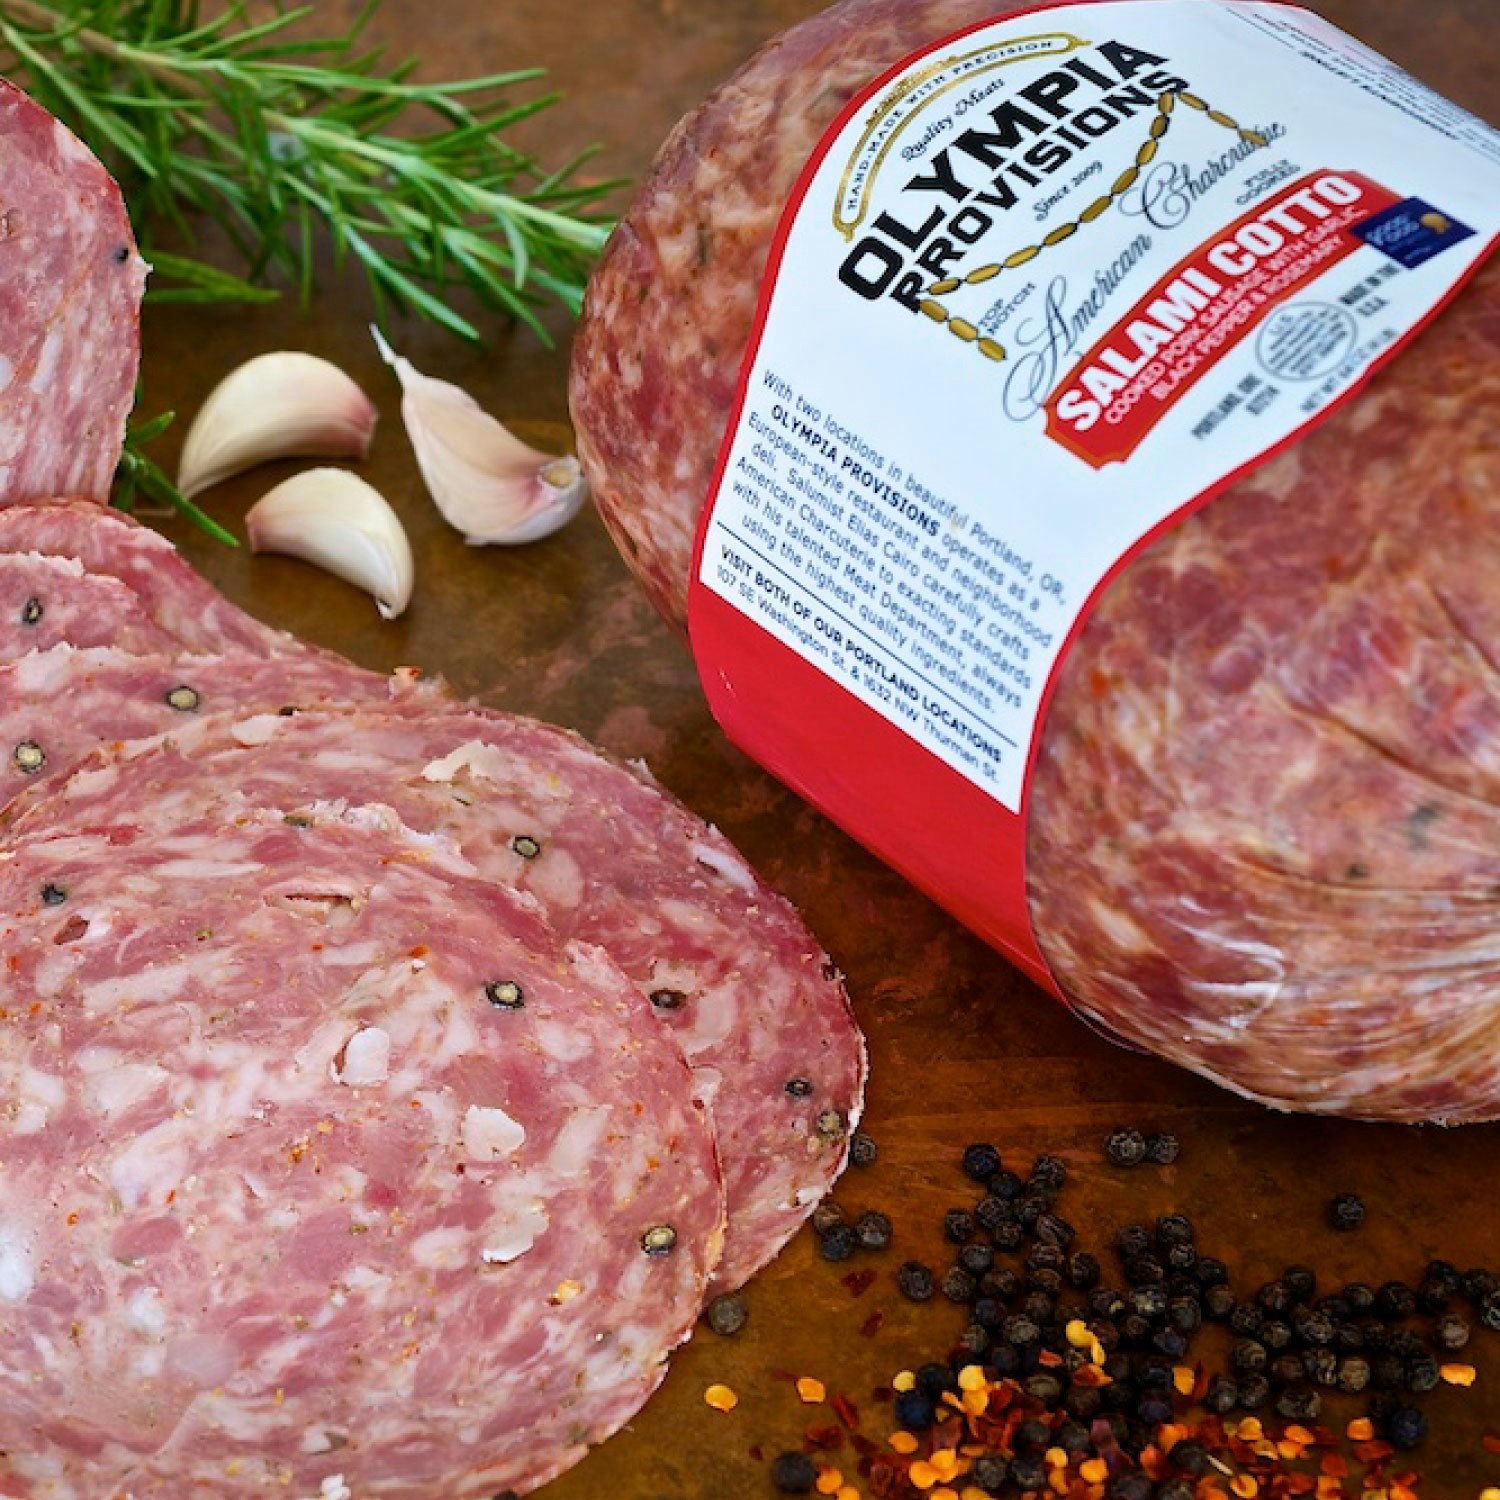 Olympia Provisions Salami Cotto meats